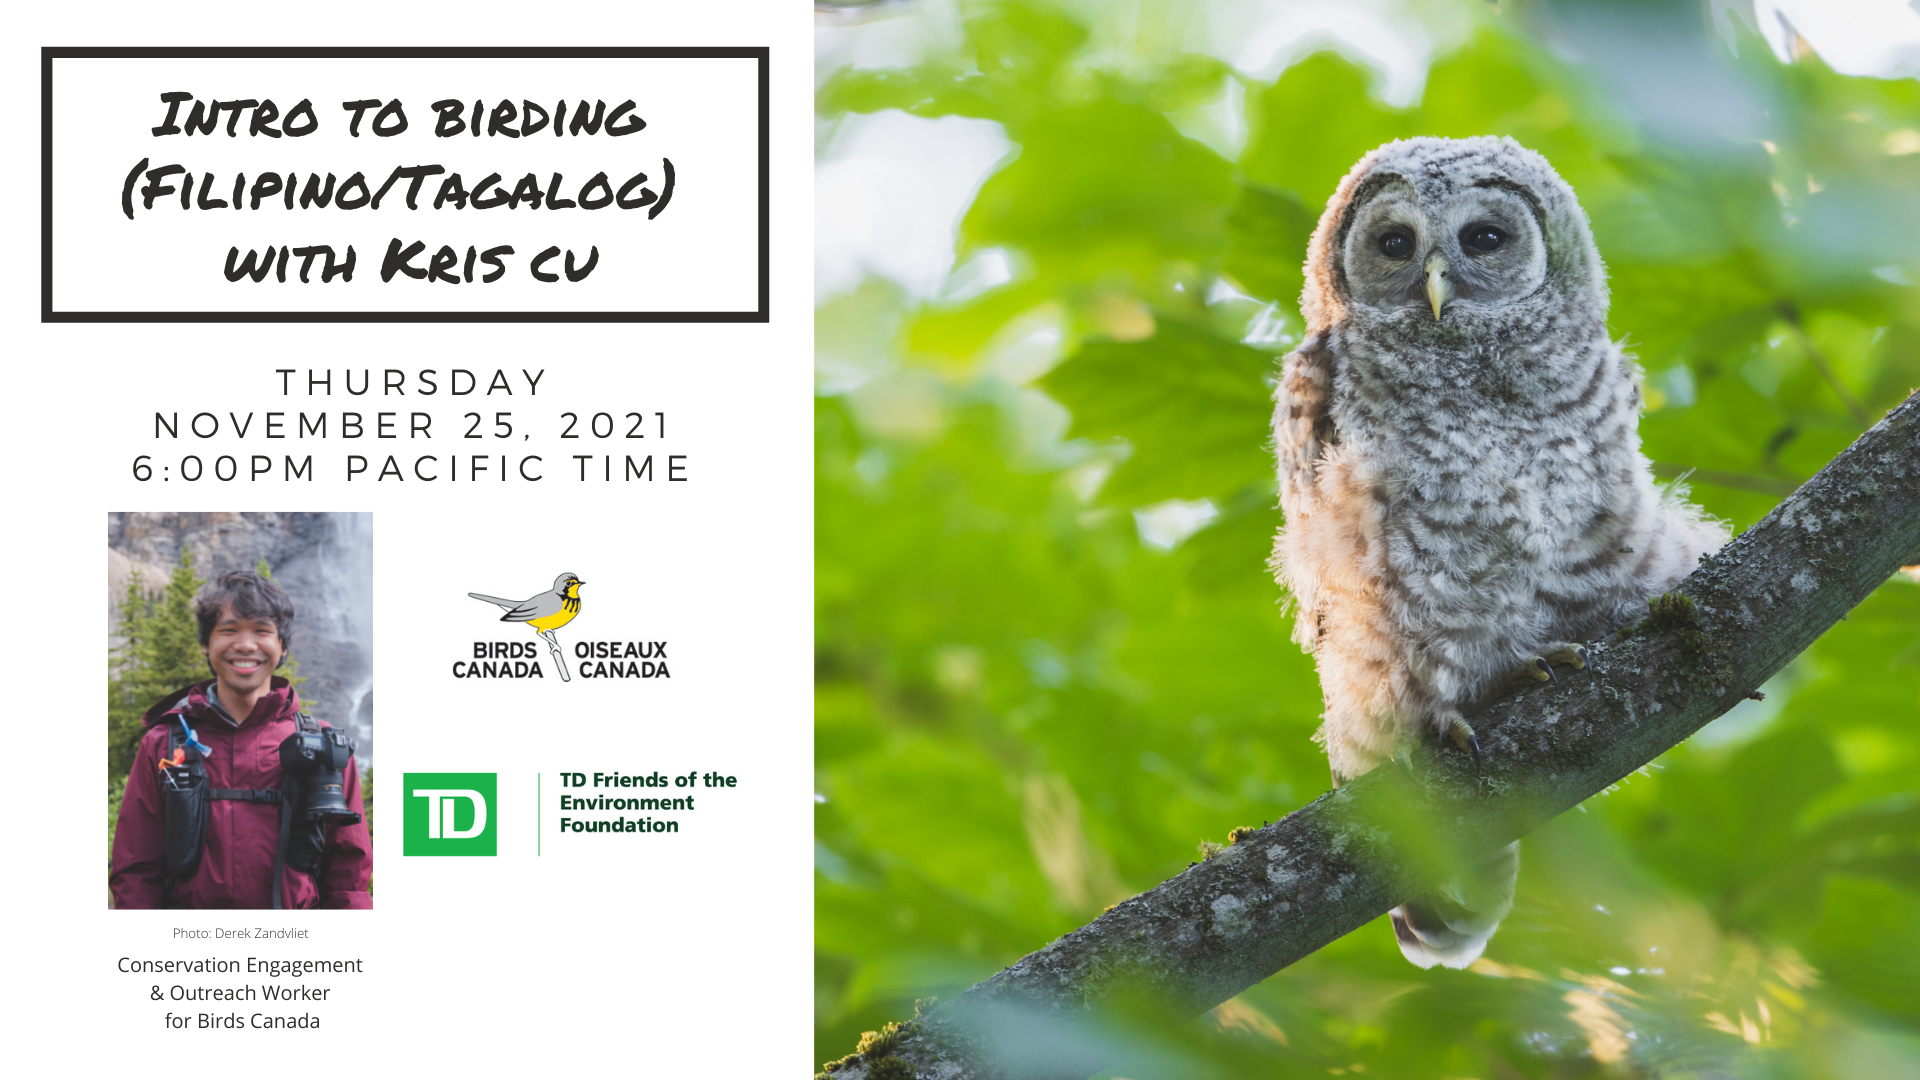 A picture of an Owl with writings in English and Tagalog the text reads "Intro to Birding in Filipino/Tagalog with Kris Cu